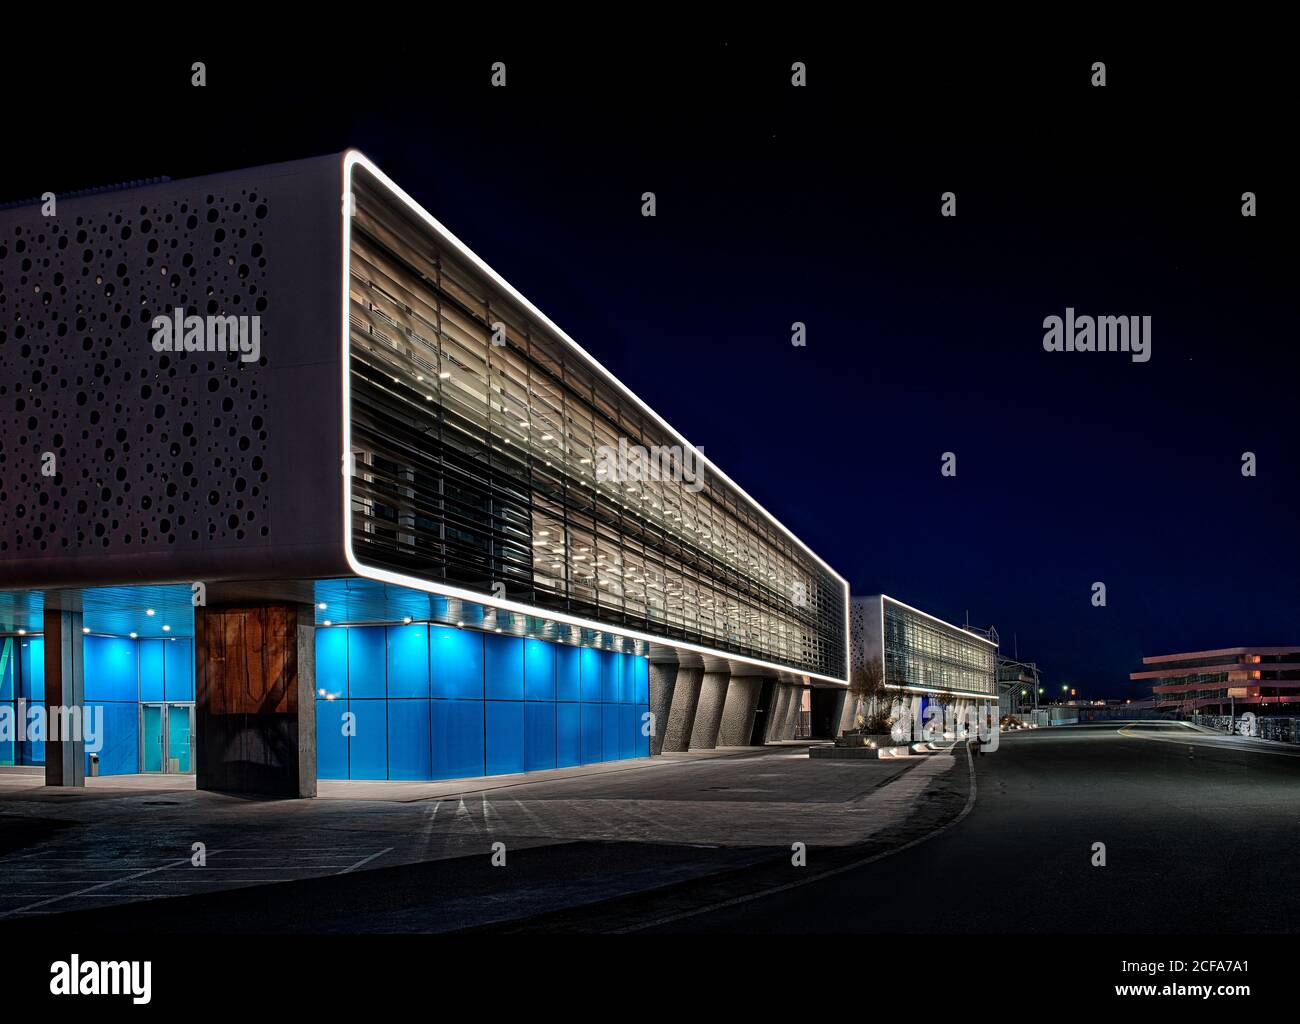 Facade of rectangular shaped building with concrete walls and vivid blue panels lighted by spot lights in composition with large striped windows against black sky at night Stock Photo